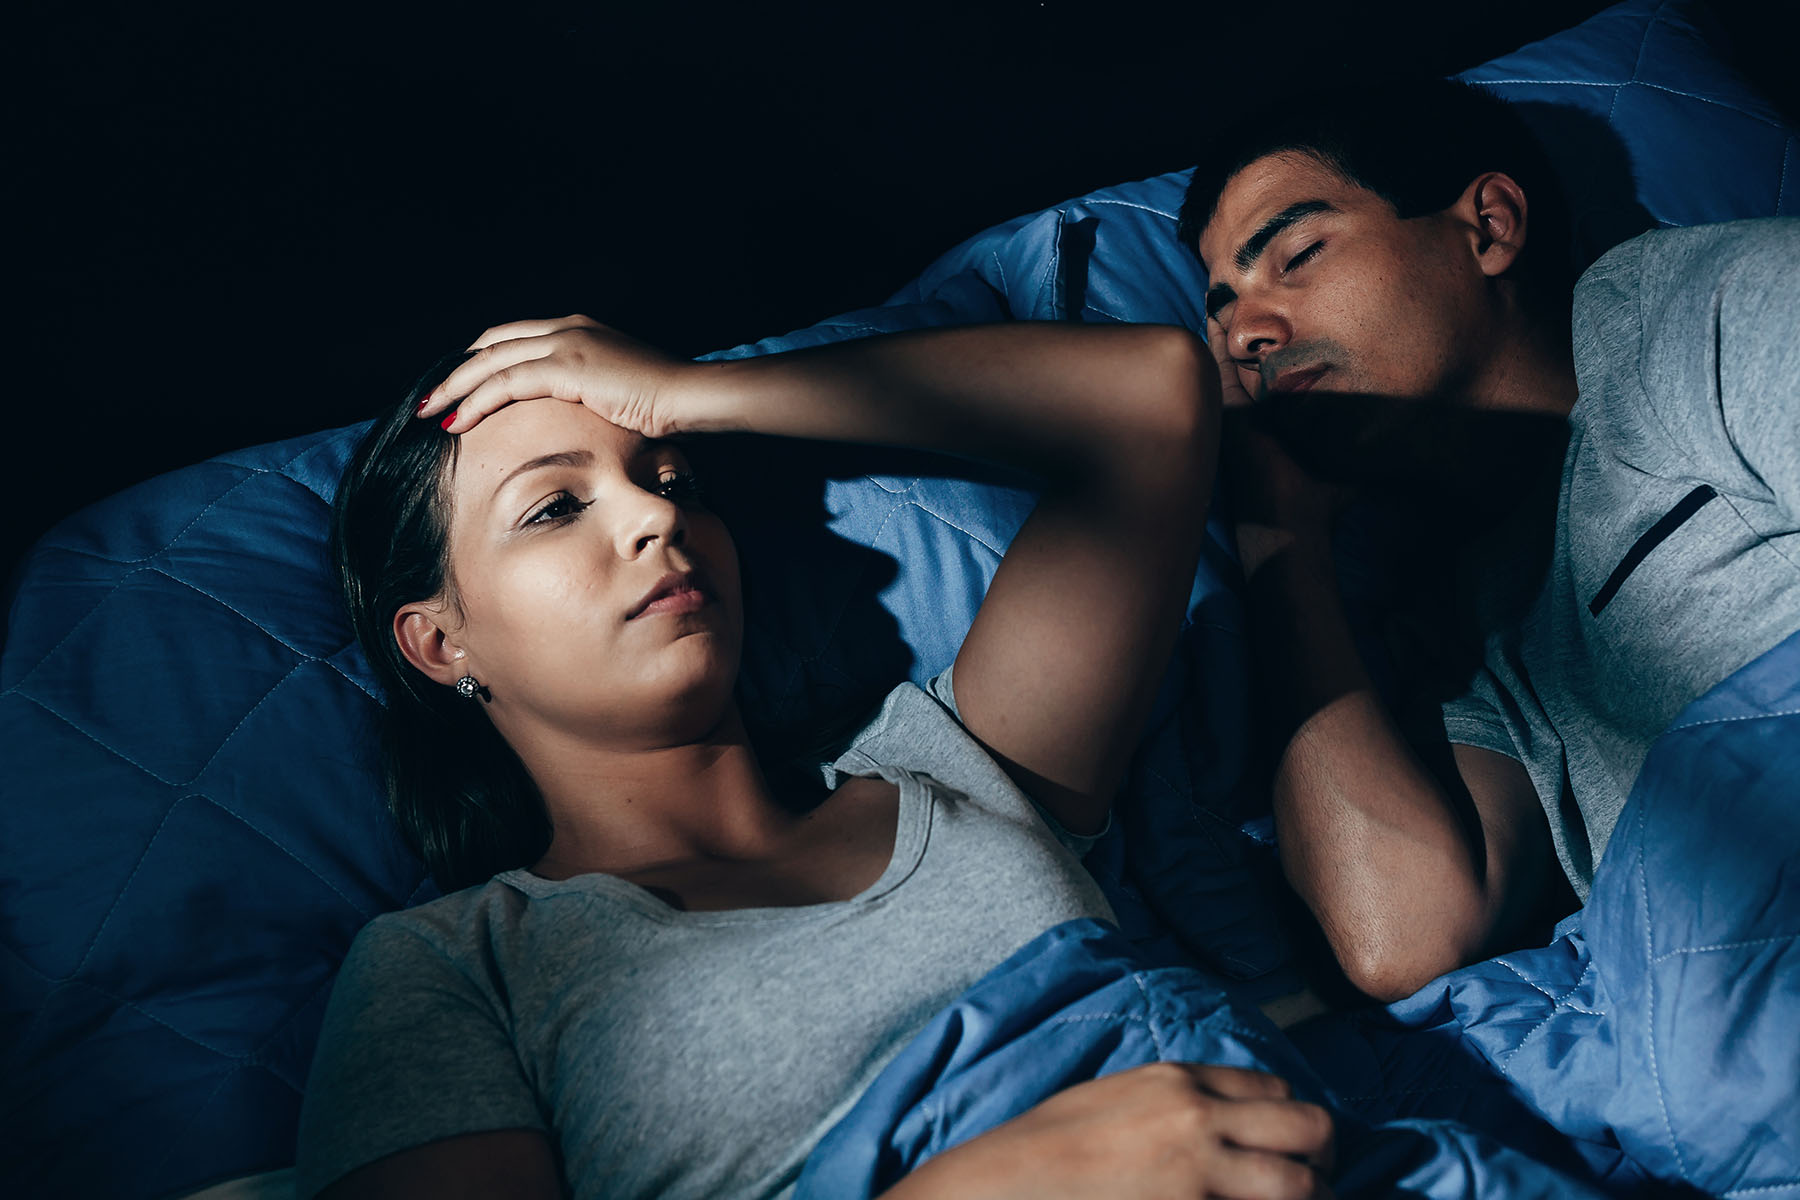 Hispanic couple lies in bed. The man is asleep but the woman has her hand to forehead. Looks stressed.